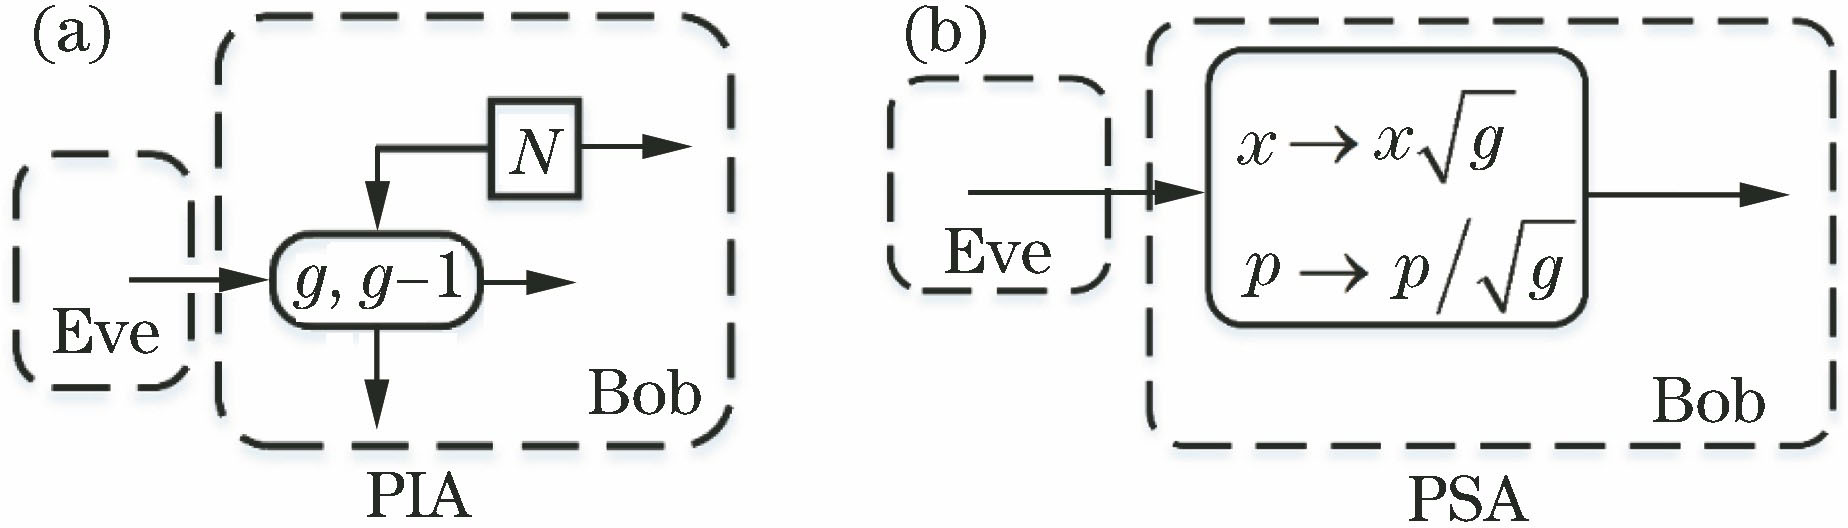 Structural models of two types of amplifiers. (a) PIA; (b) PSA